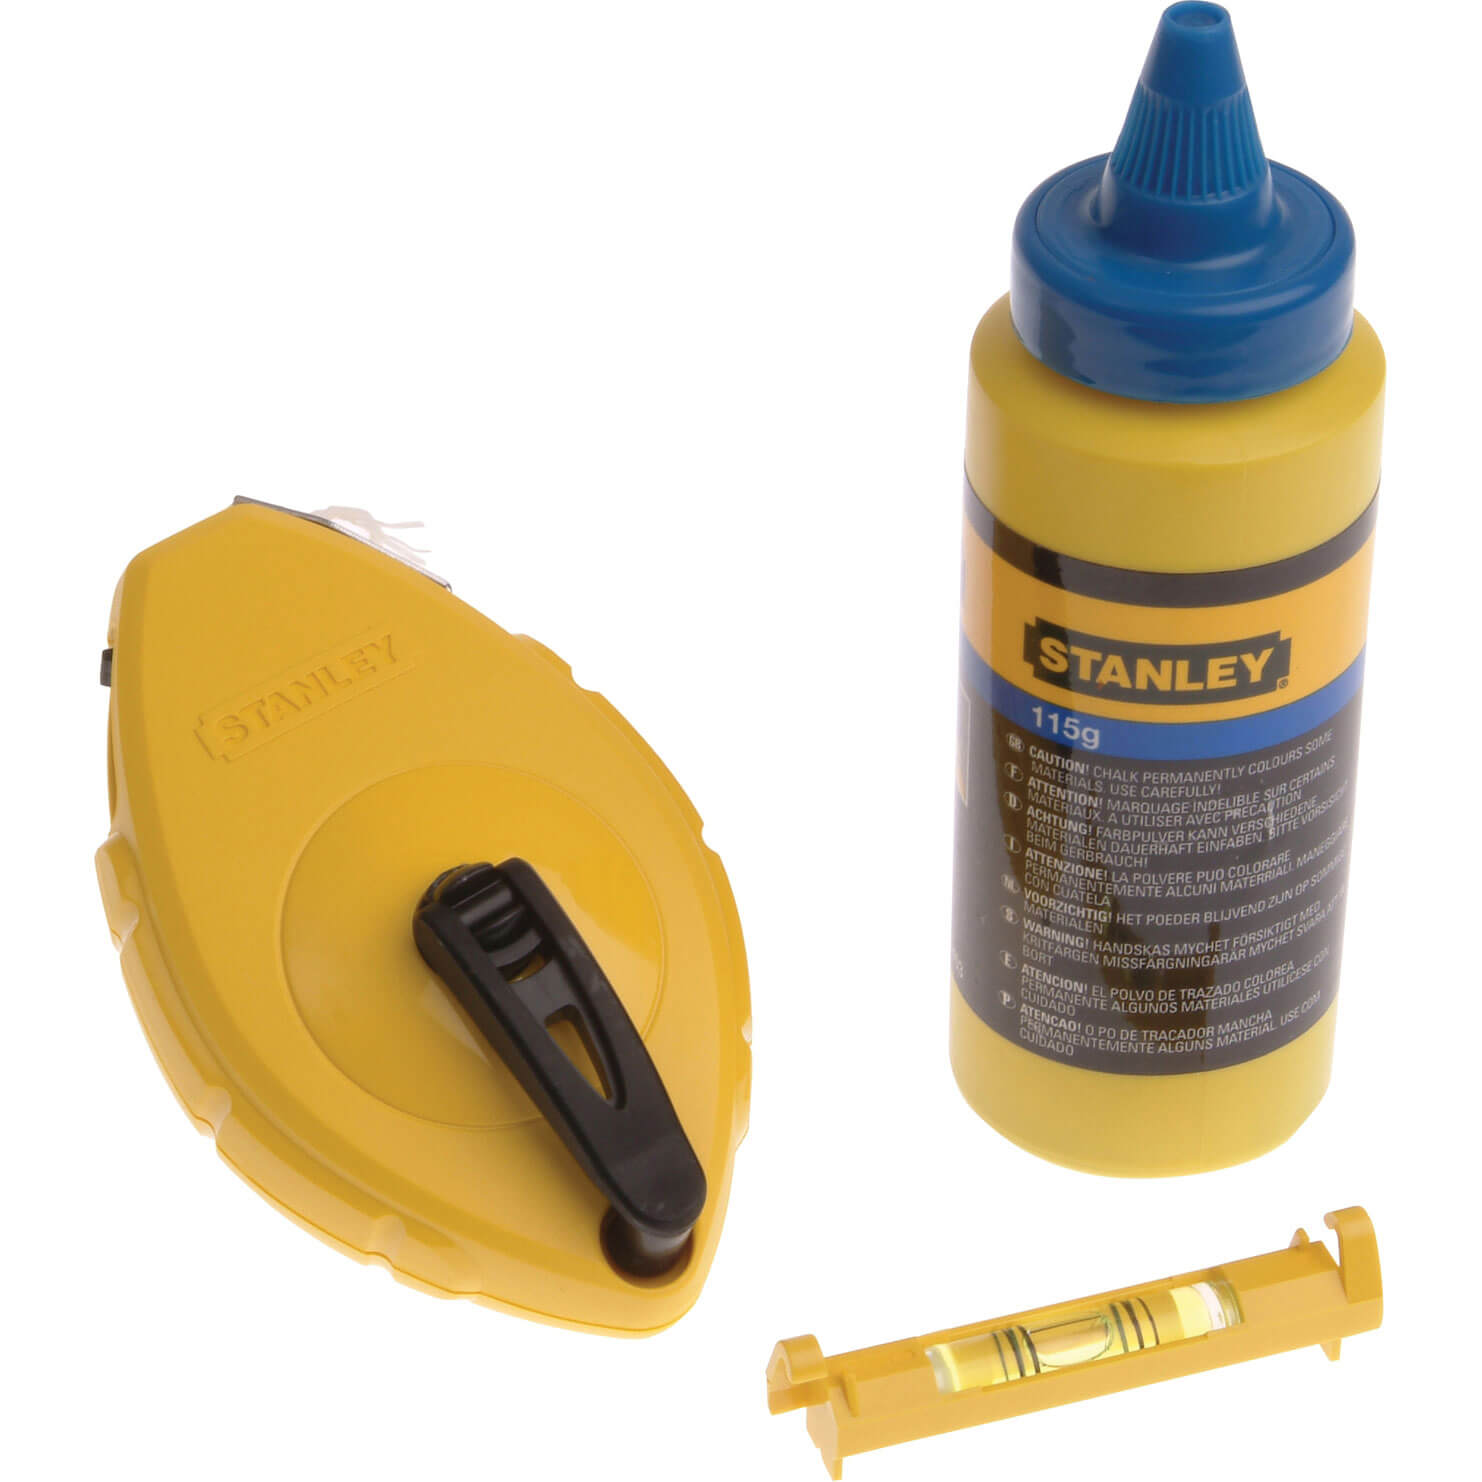 Photo of Stanley Chalk Line Reel- Chalk Refill And Level 30m